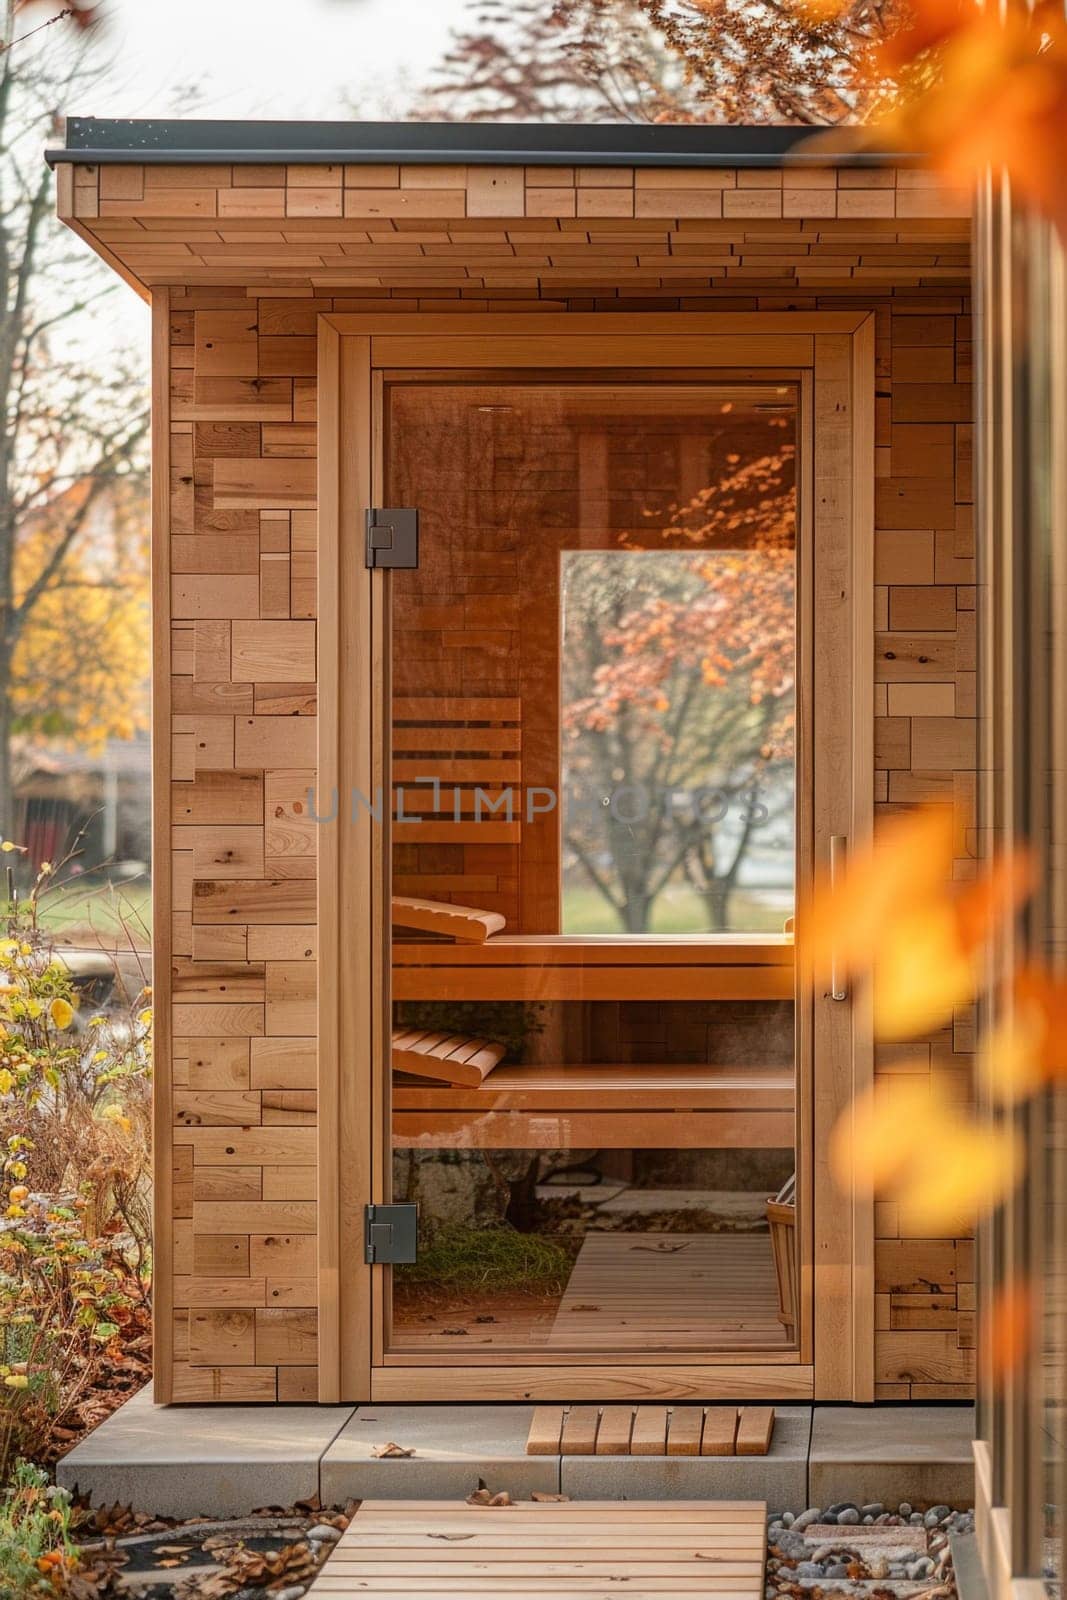 In a beautiful landscape, a wooden sauna with a glass door and window blends seamlessly with the natural surroundings